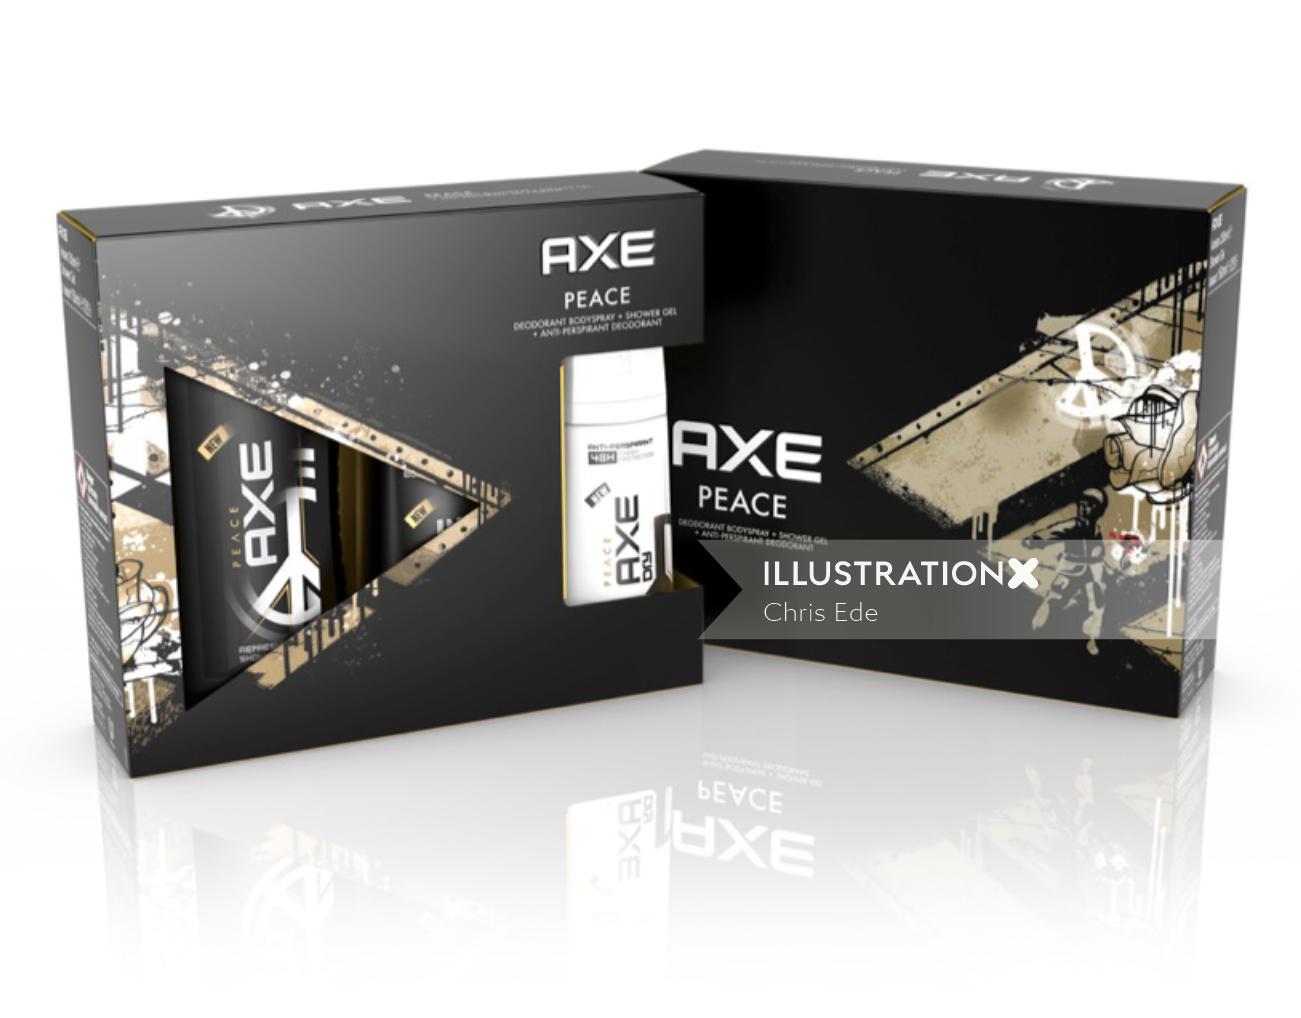 Packaging Axe cover